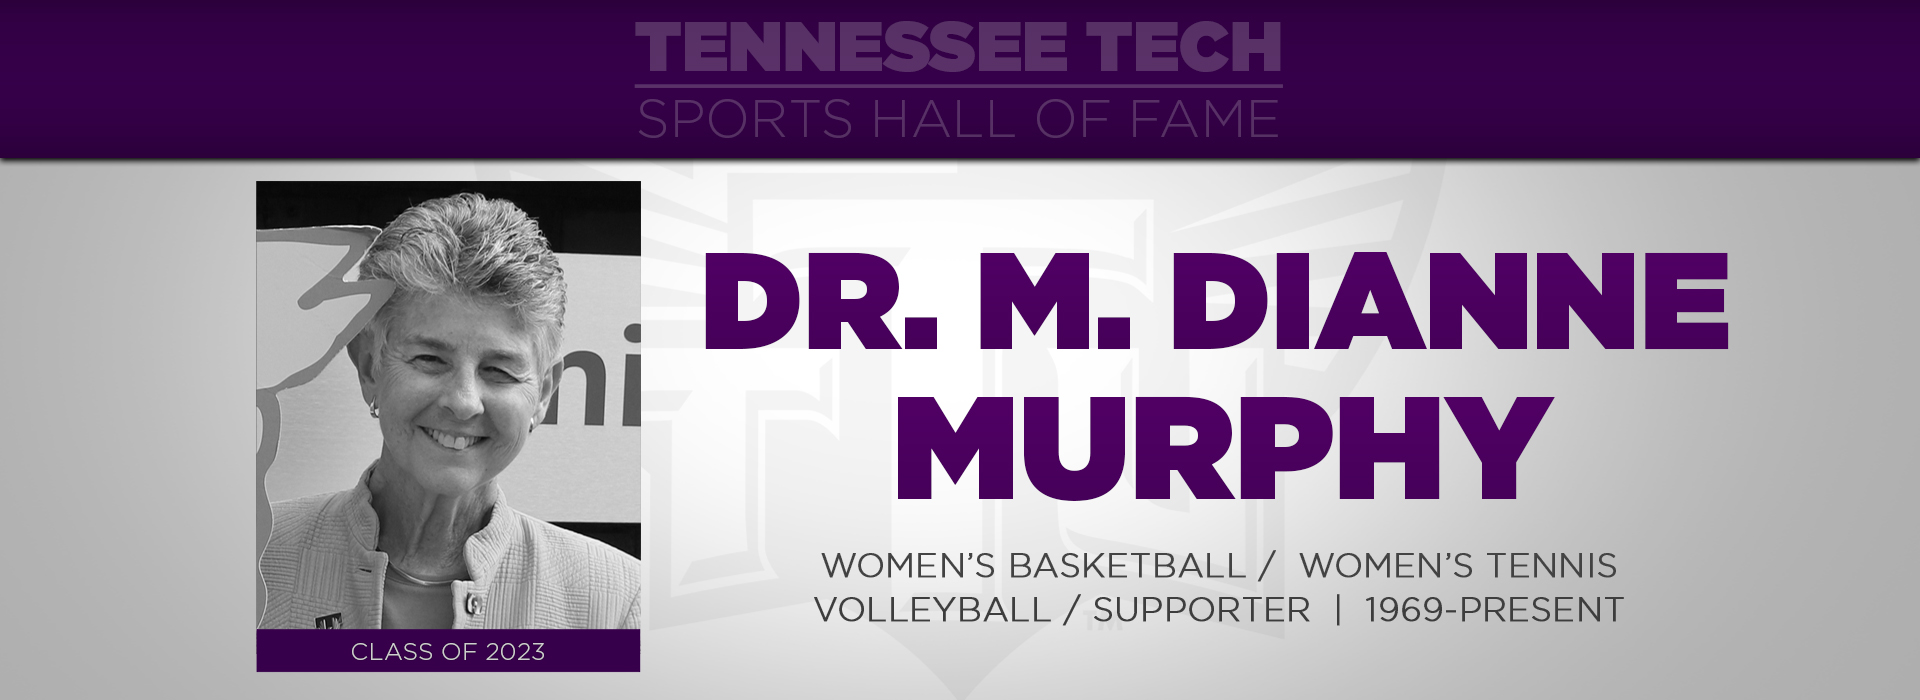 Dr. M. Dianne Murphy to be inducted into TTU Sports Hall of Fame Friday, Nov. 3